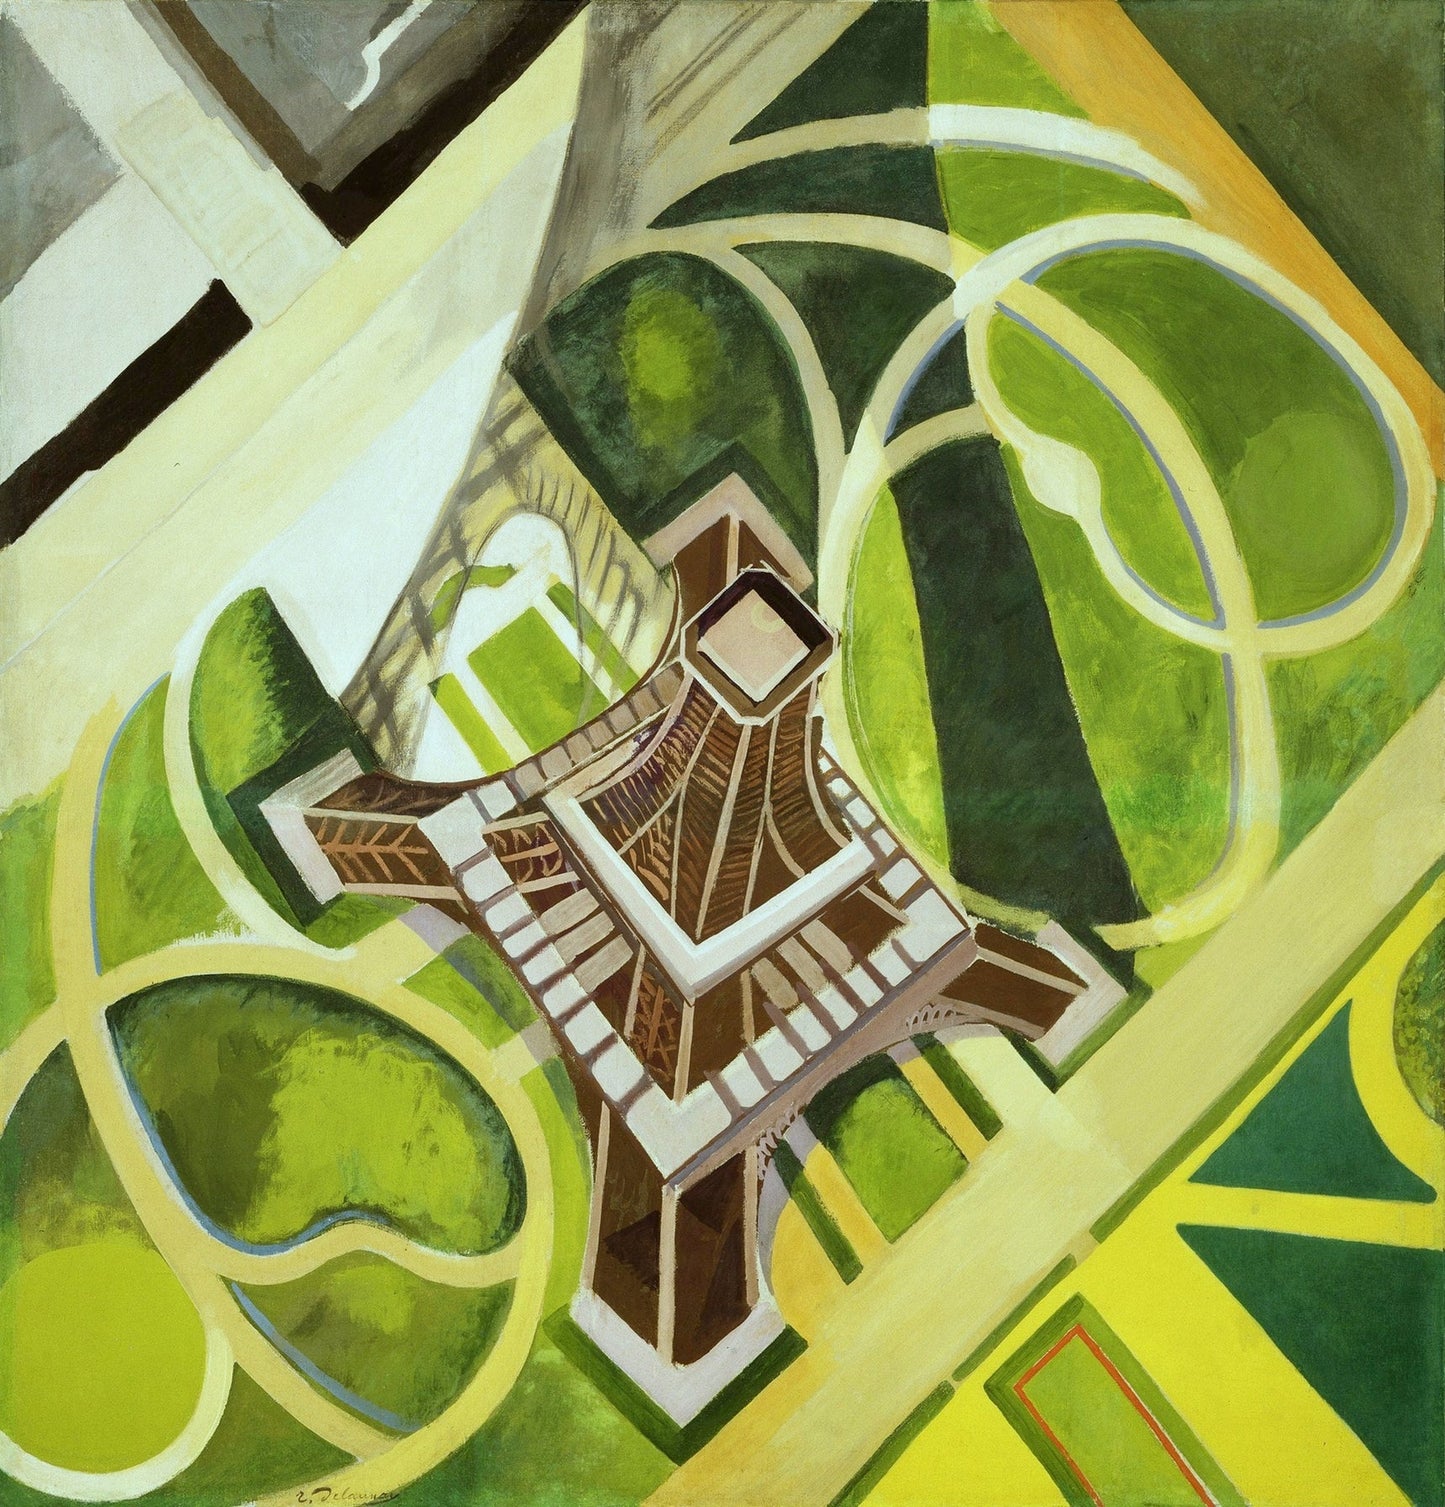 Cubist Eiffel Tower, Paris (1920s) | Inspired by Picasso Cubism Artists | Robert Delaunay Posters, Prints, & Visual Artwork The Trumpet Shop   